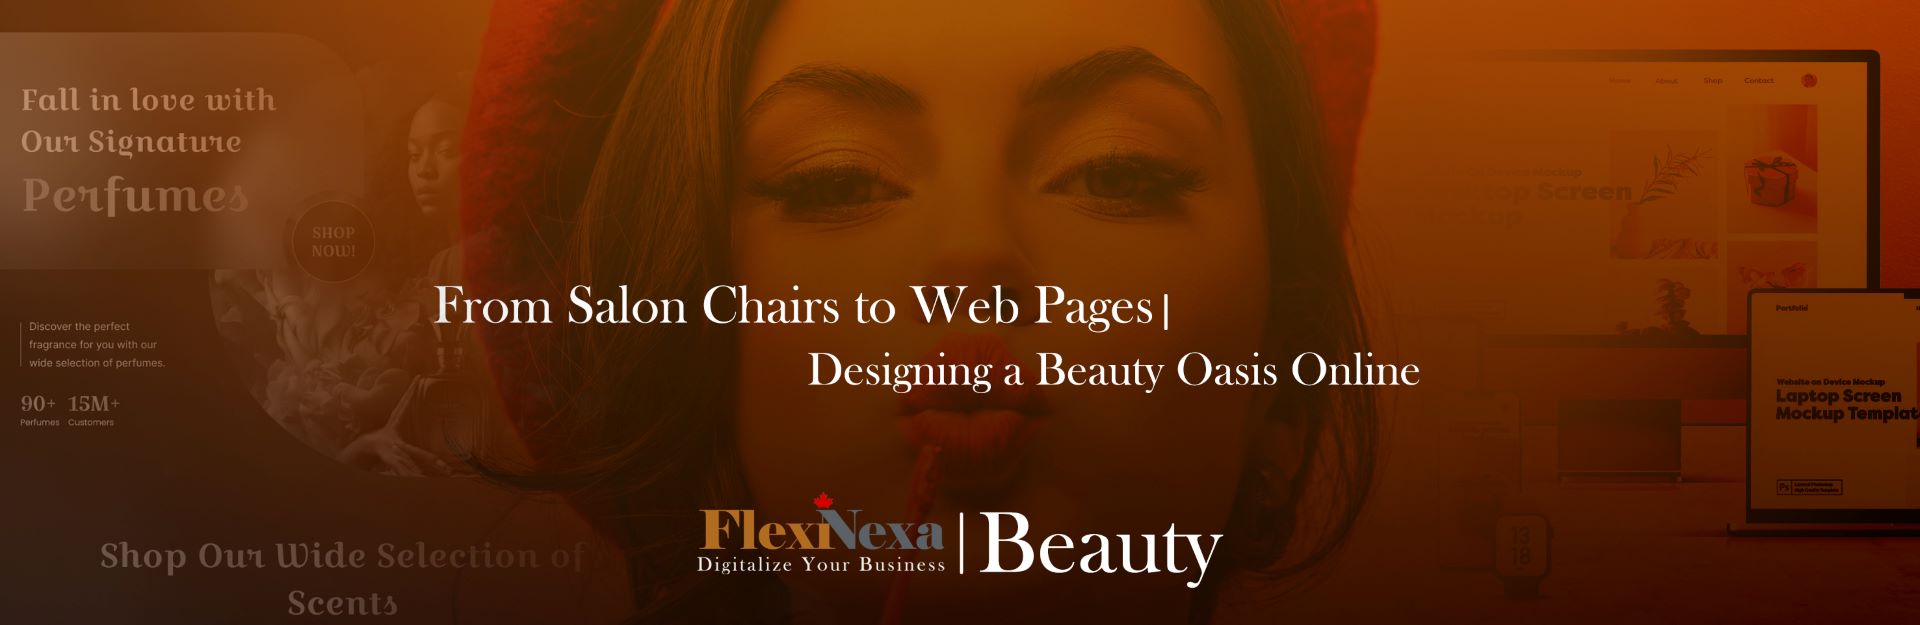 From Salon Chairs to Web Pages: Designing a Beauty Oasis Online